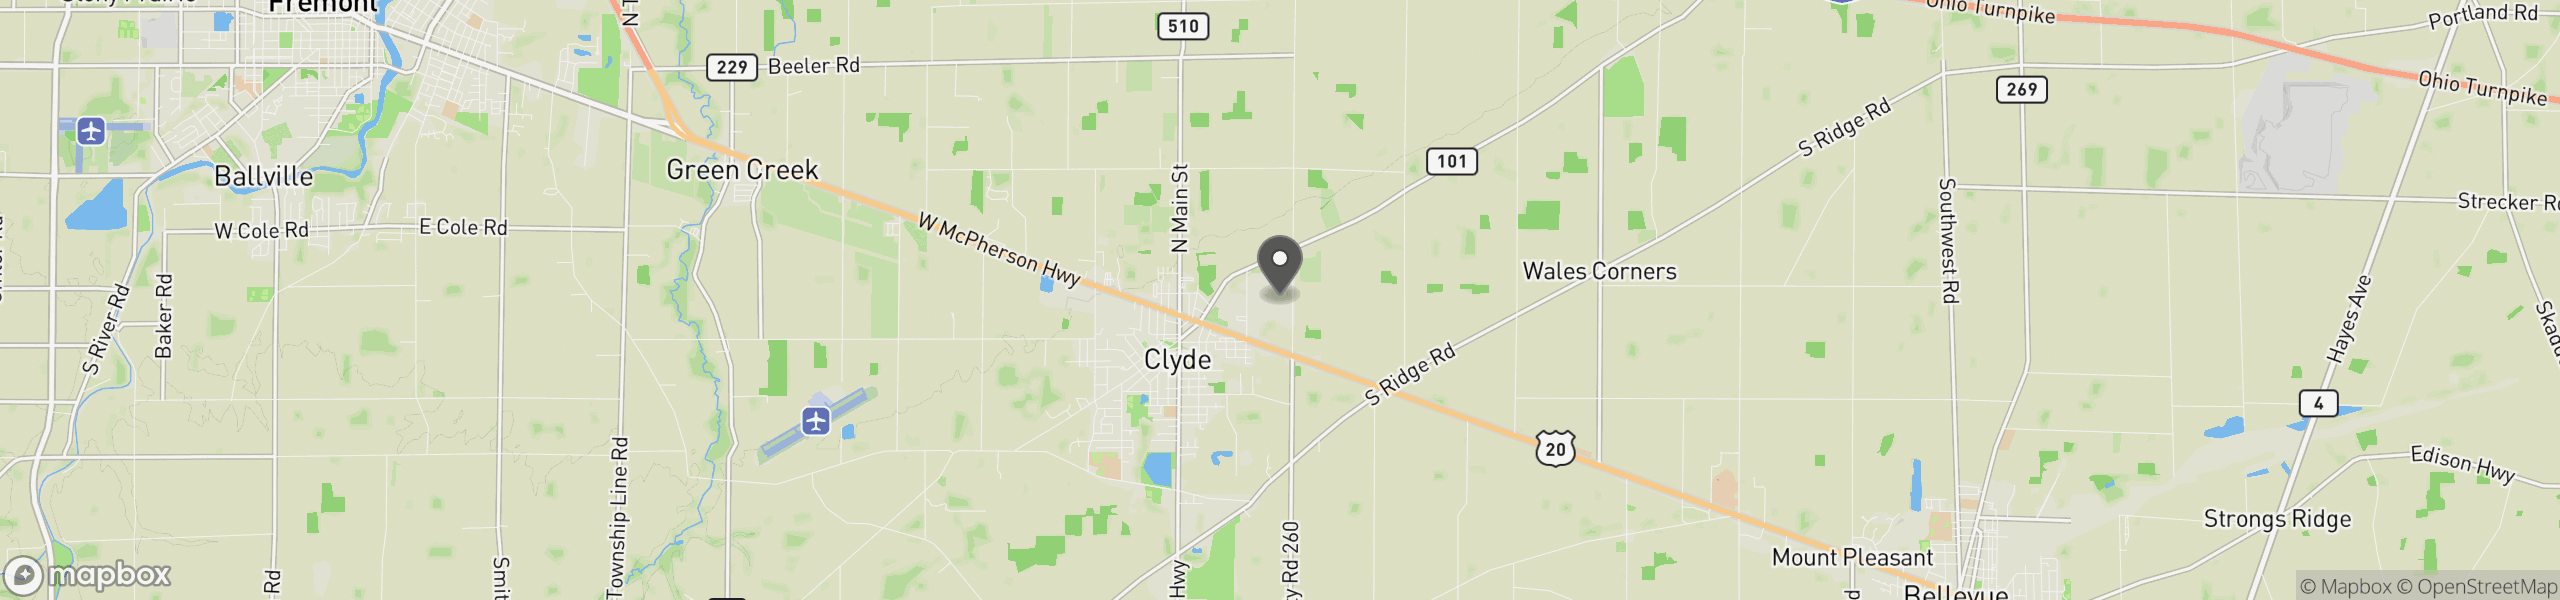 Clyde, OH